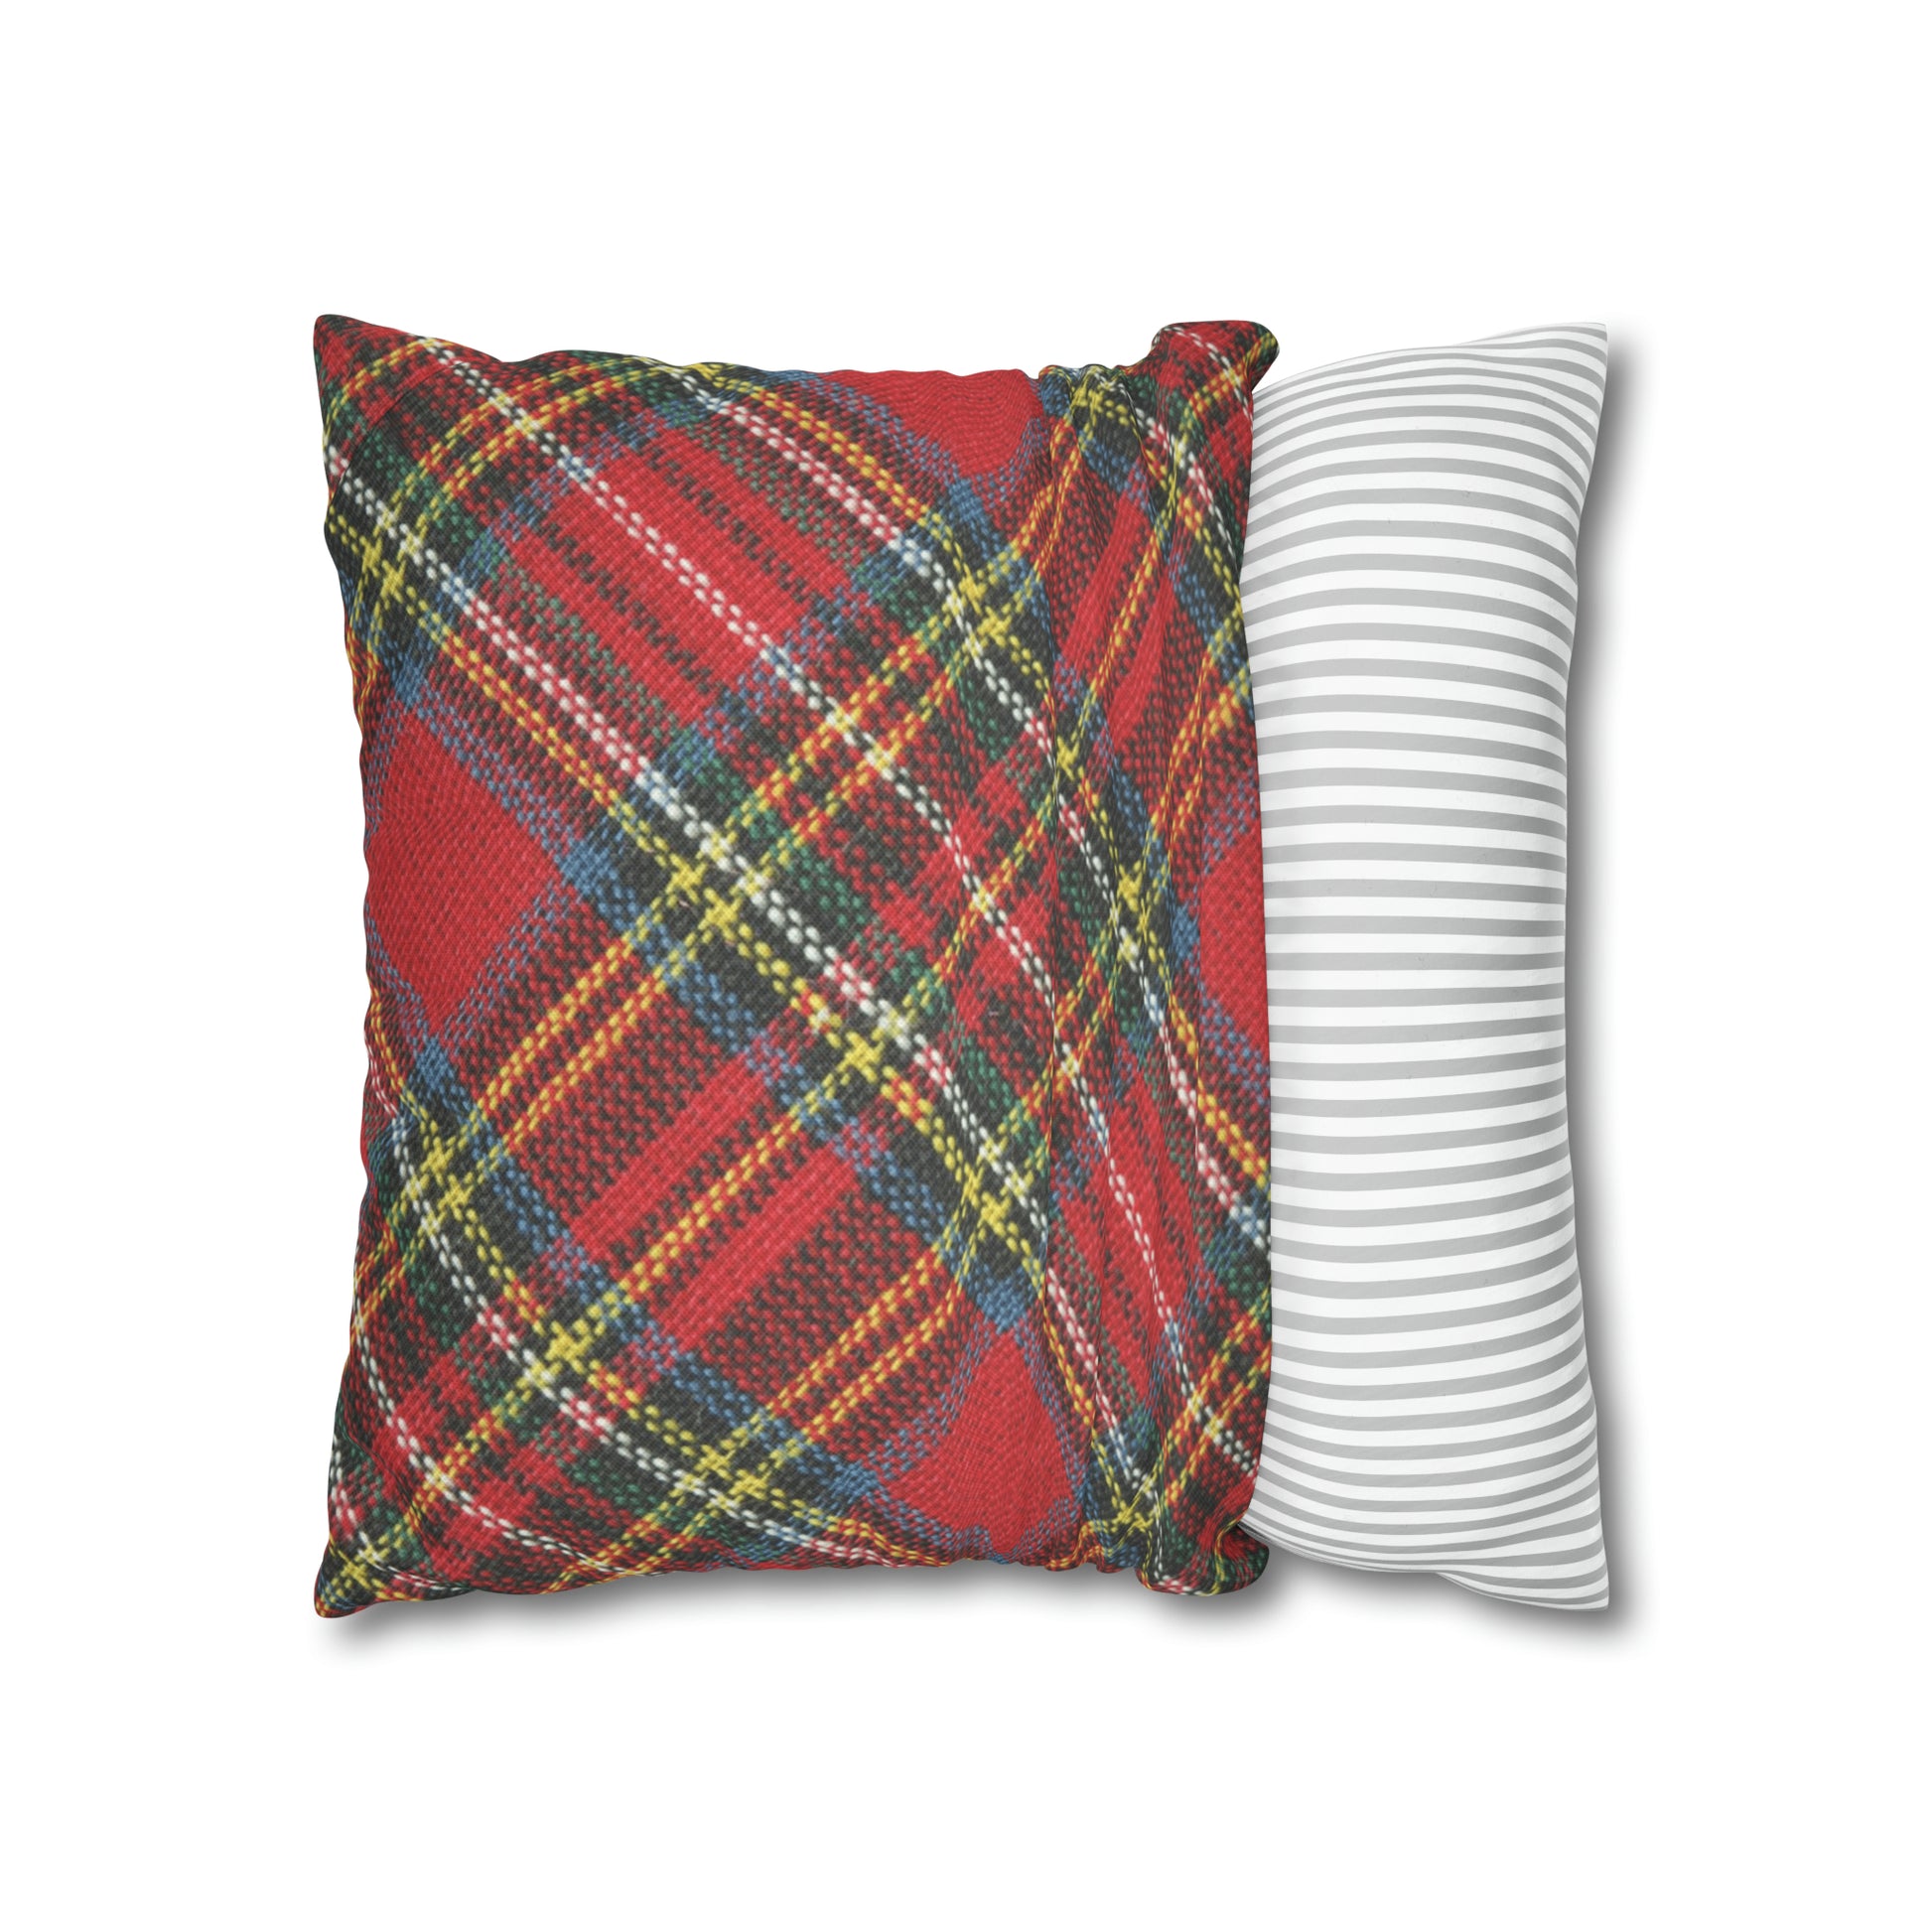 An American made, Printify red-plaid pillow case with an easy-care design.